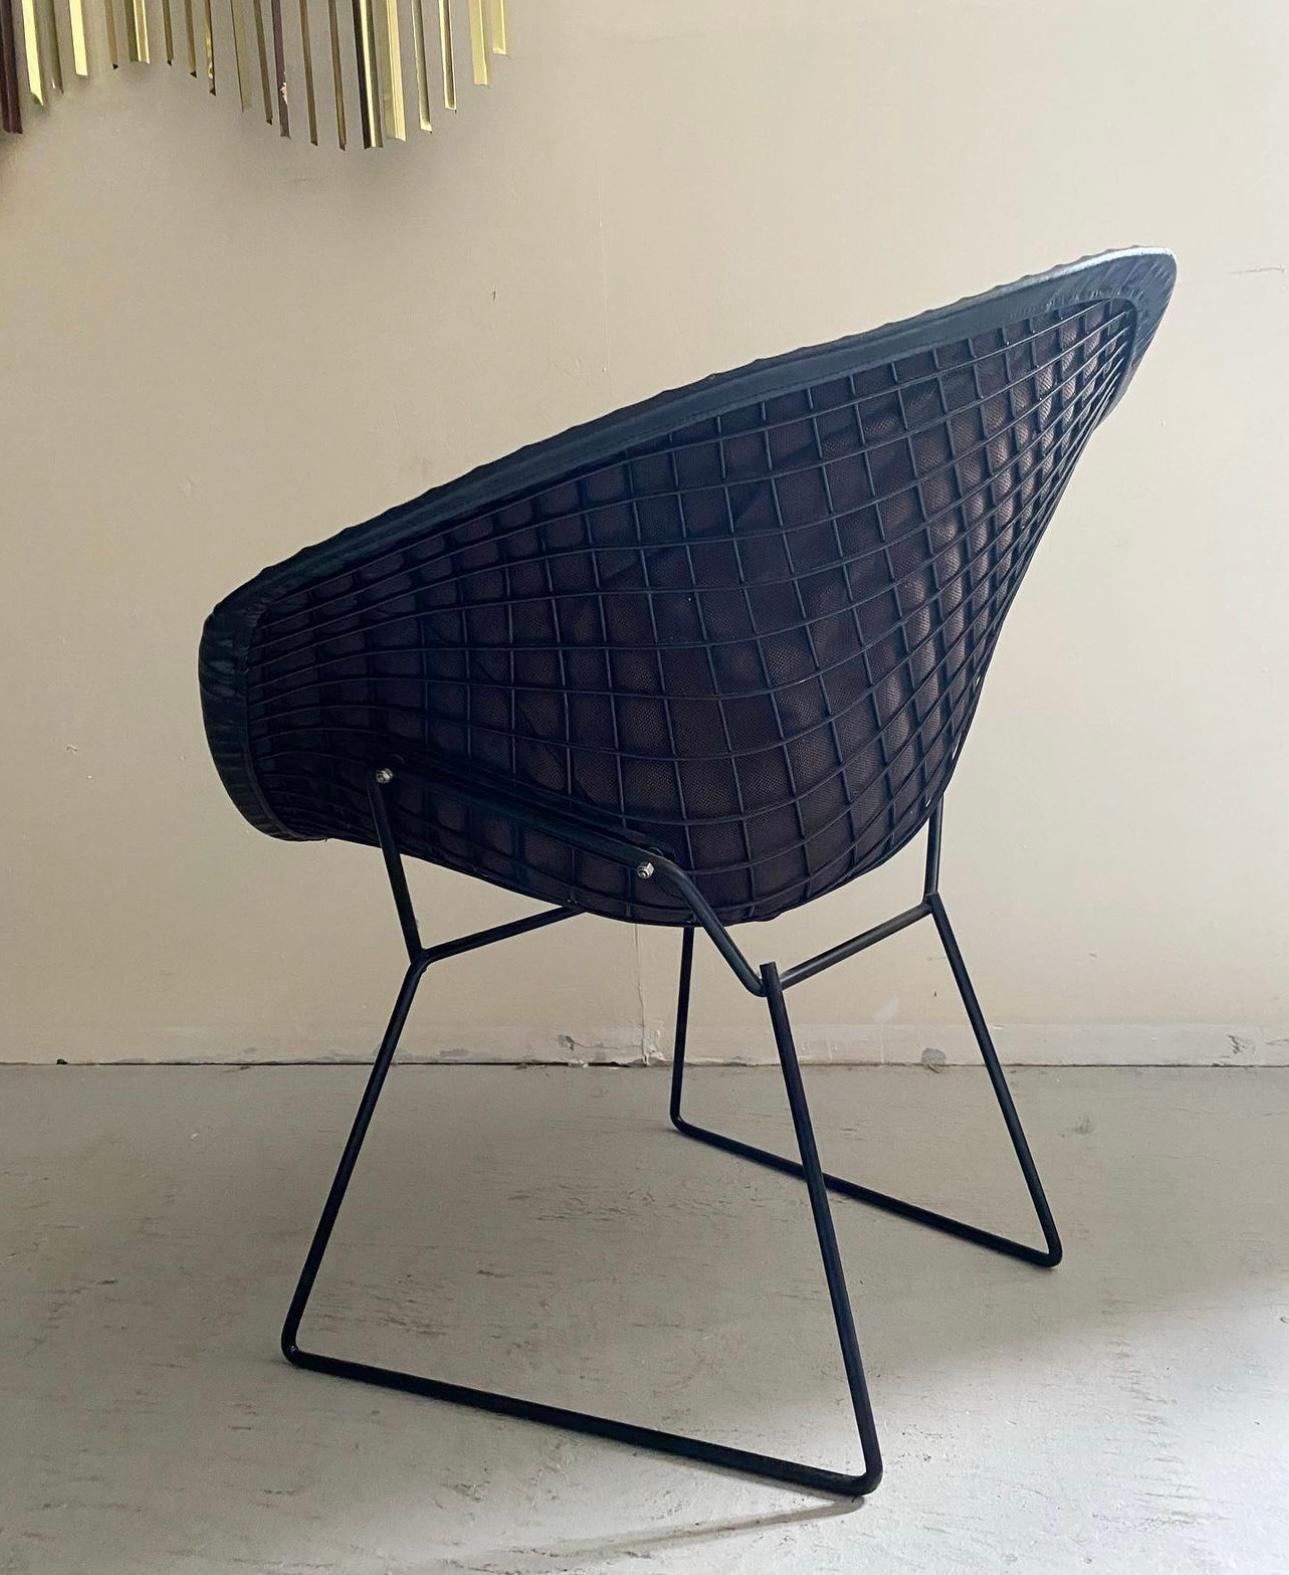 Mid-20th Century Mid-Century Modern “Diamond” Chairs Designed by Harry Bertoia for Knoll, a Pair For Sale